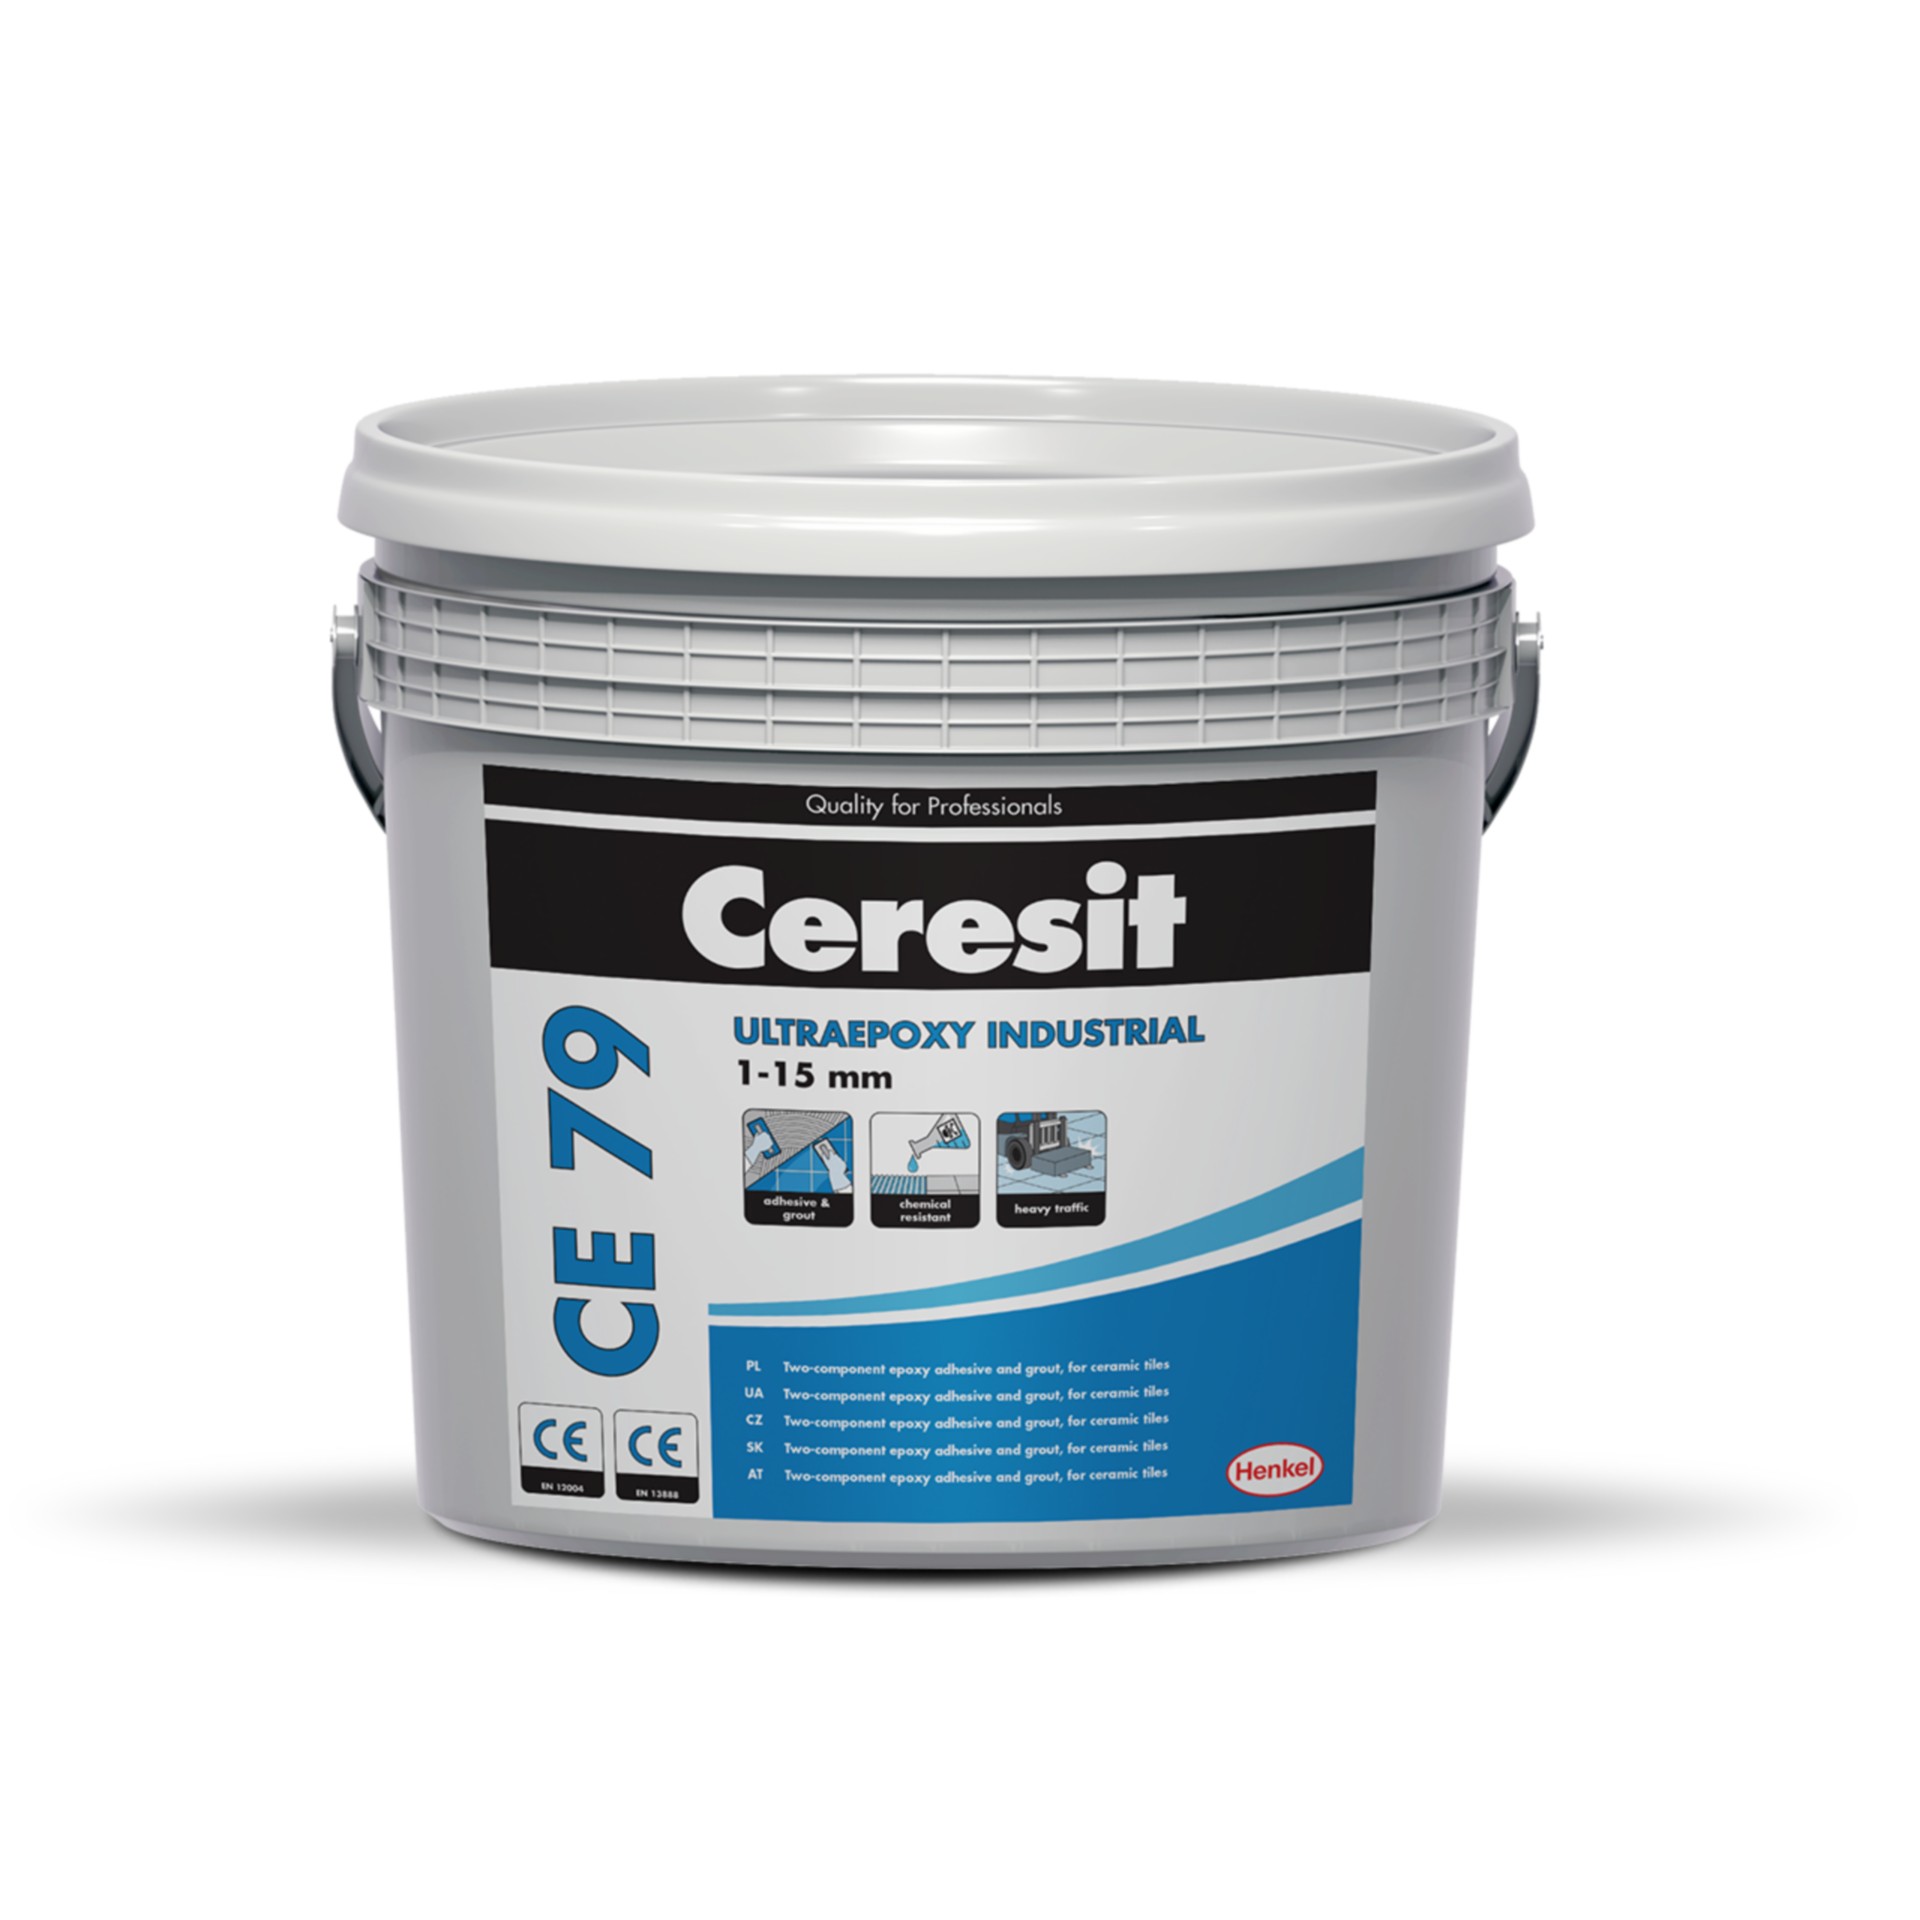 Ceresit CE79 Ultraepoxy Industrial. Two-component chemical-resistant epoxy mortar. White (701) 5Kg